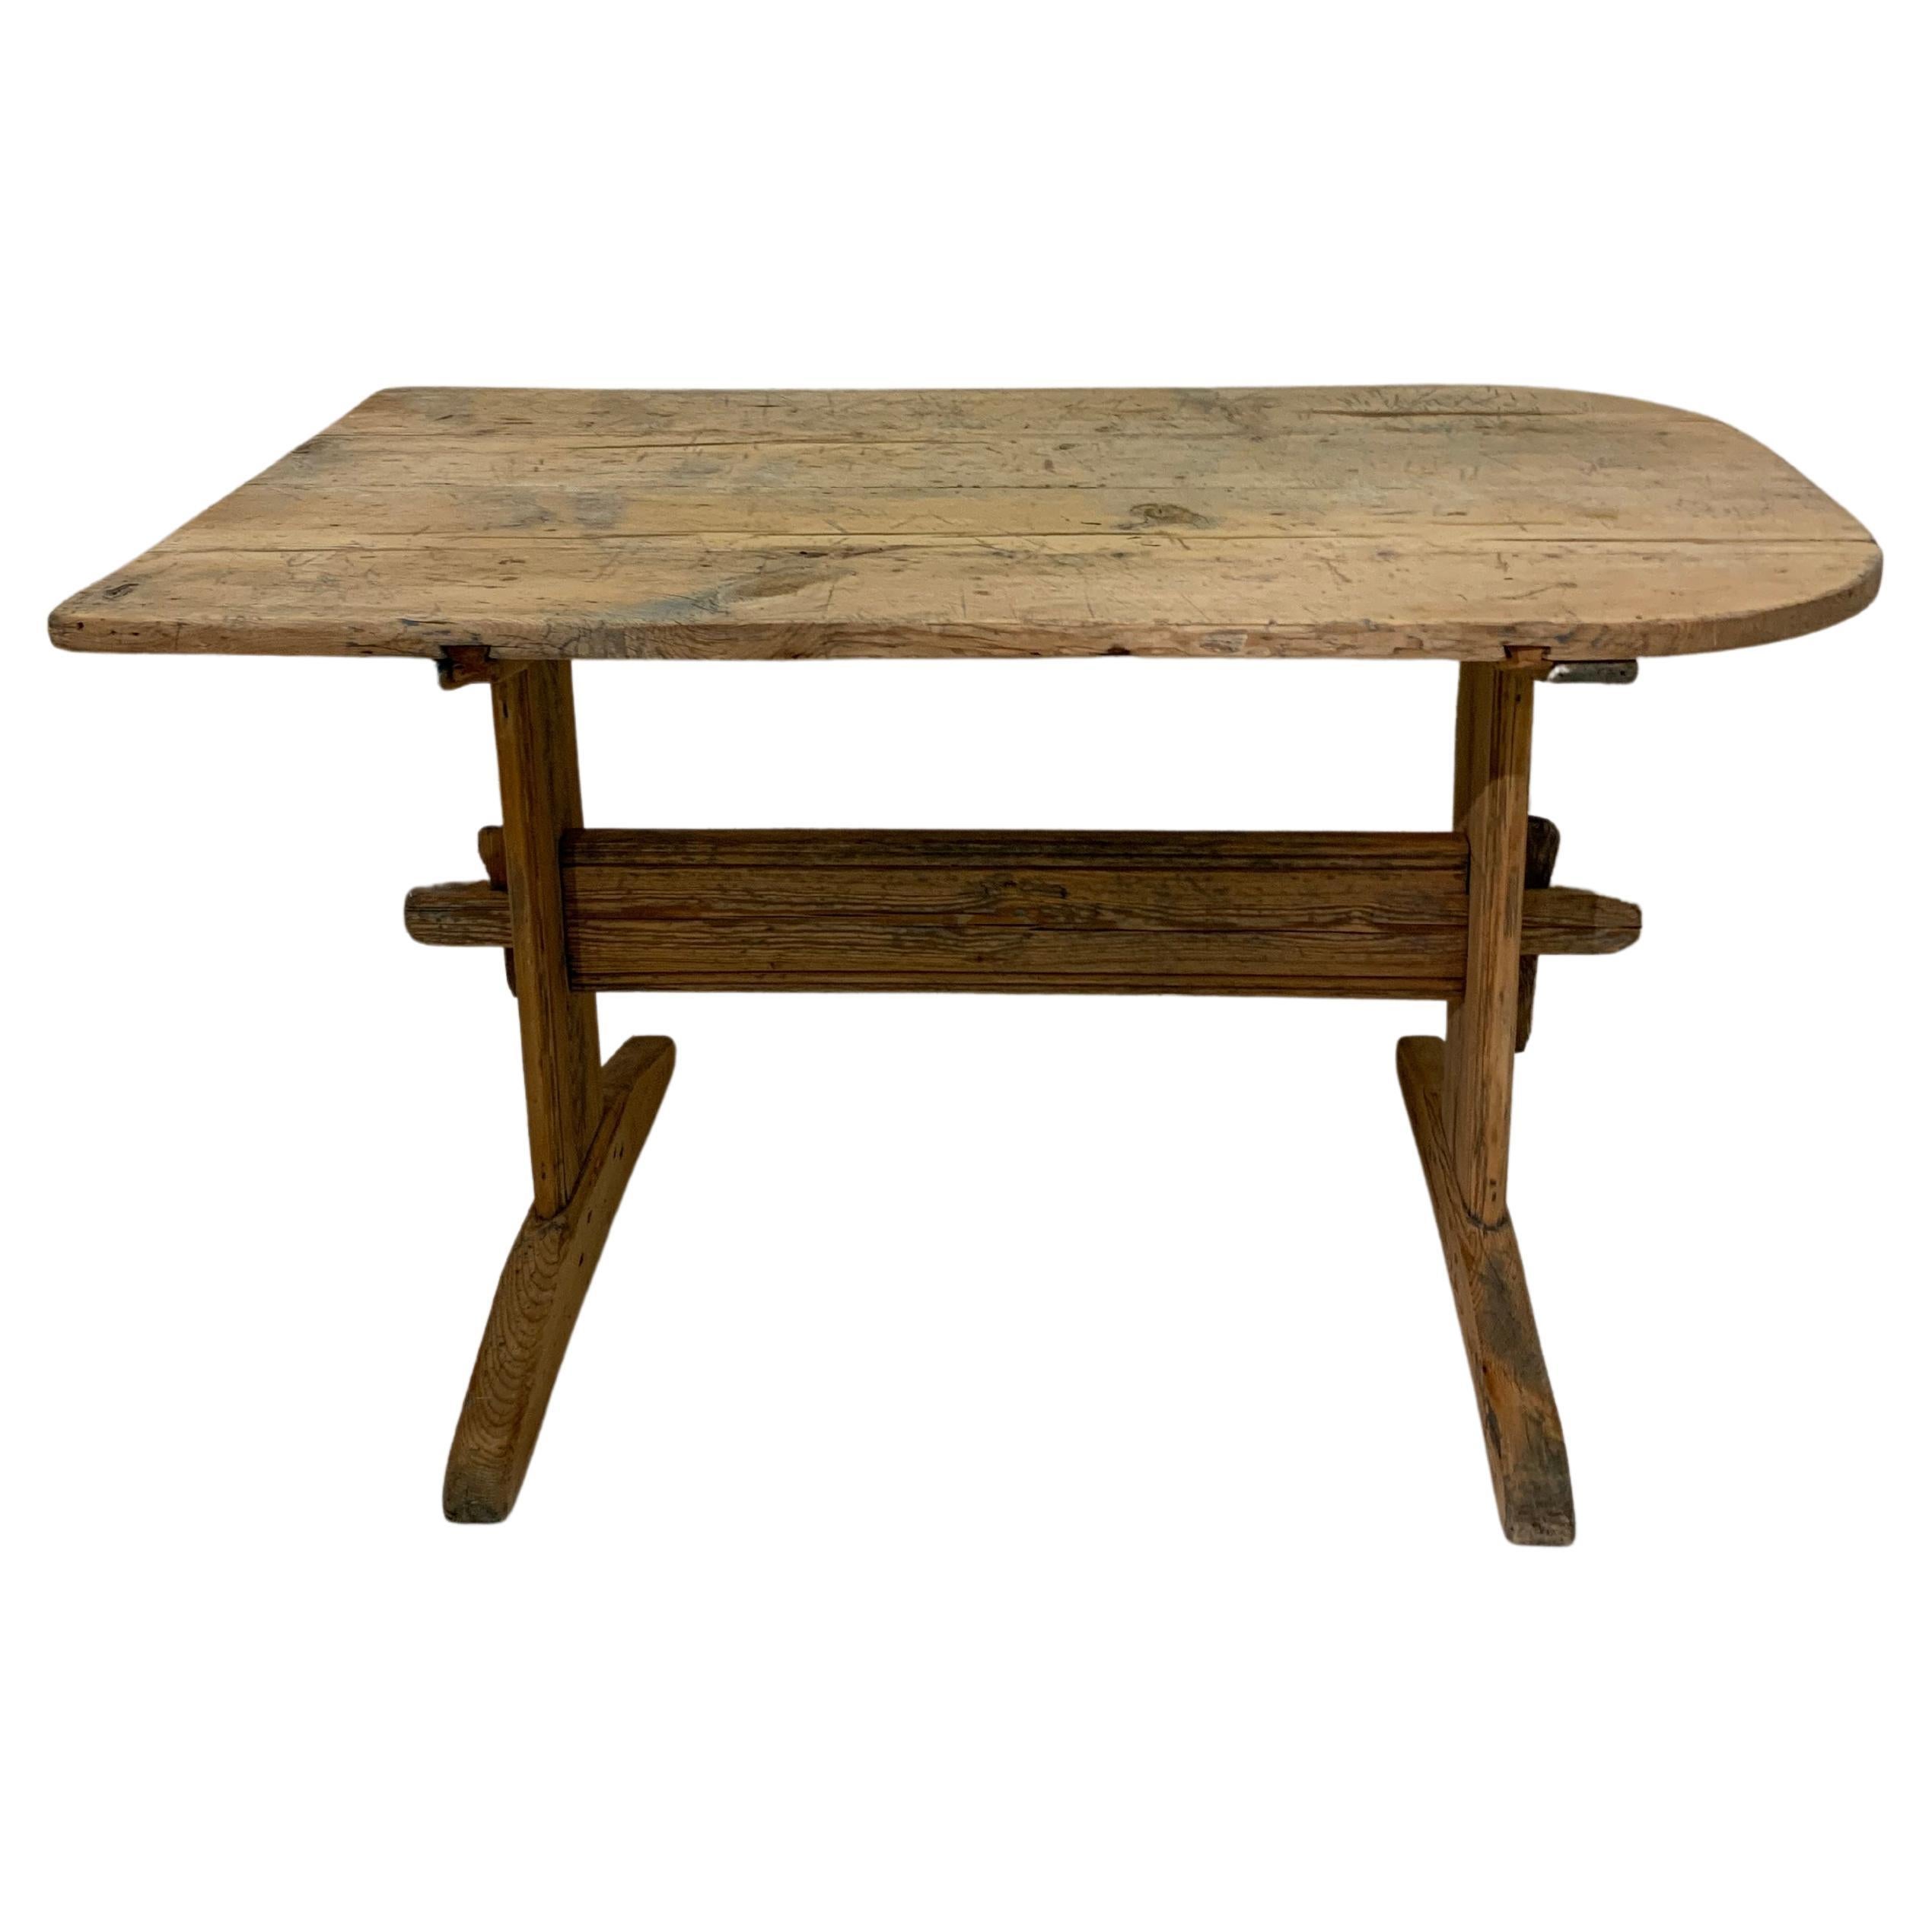 Swedish Country Pine Refectory Table with One Curved End, circa 18th Century For Sale